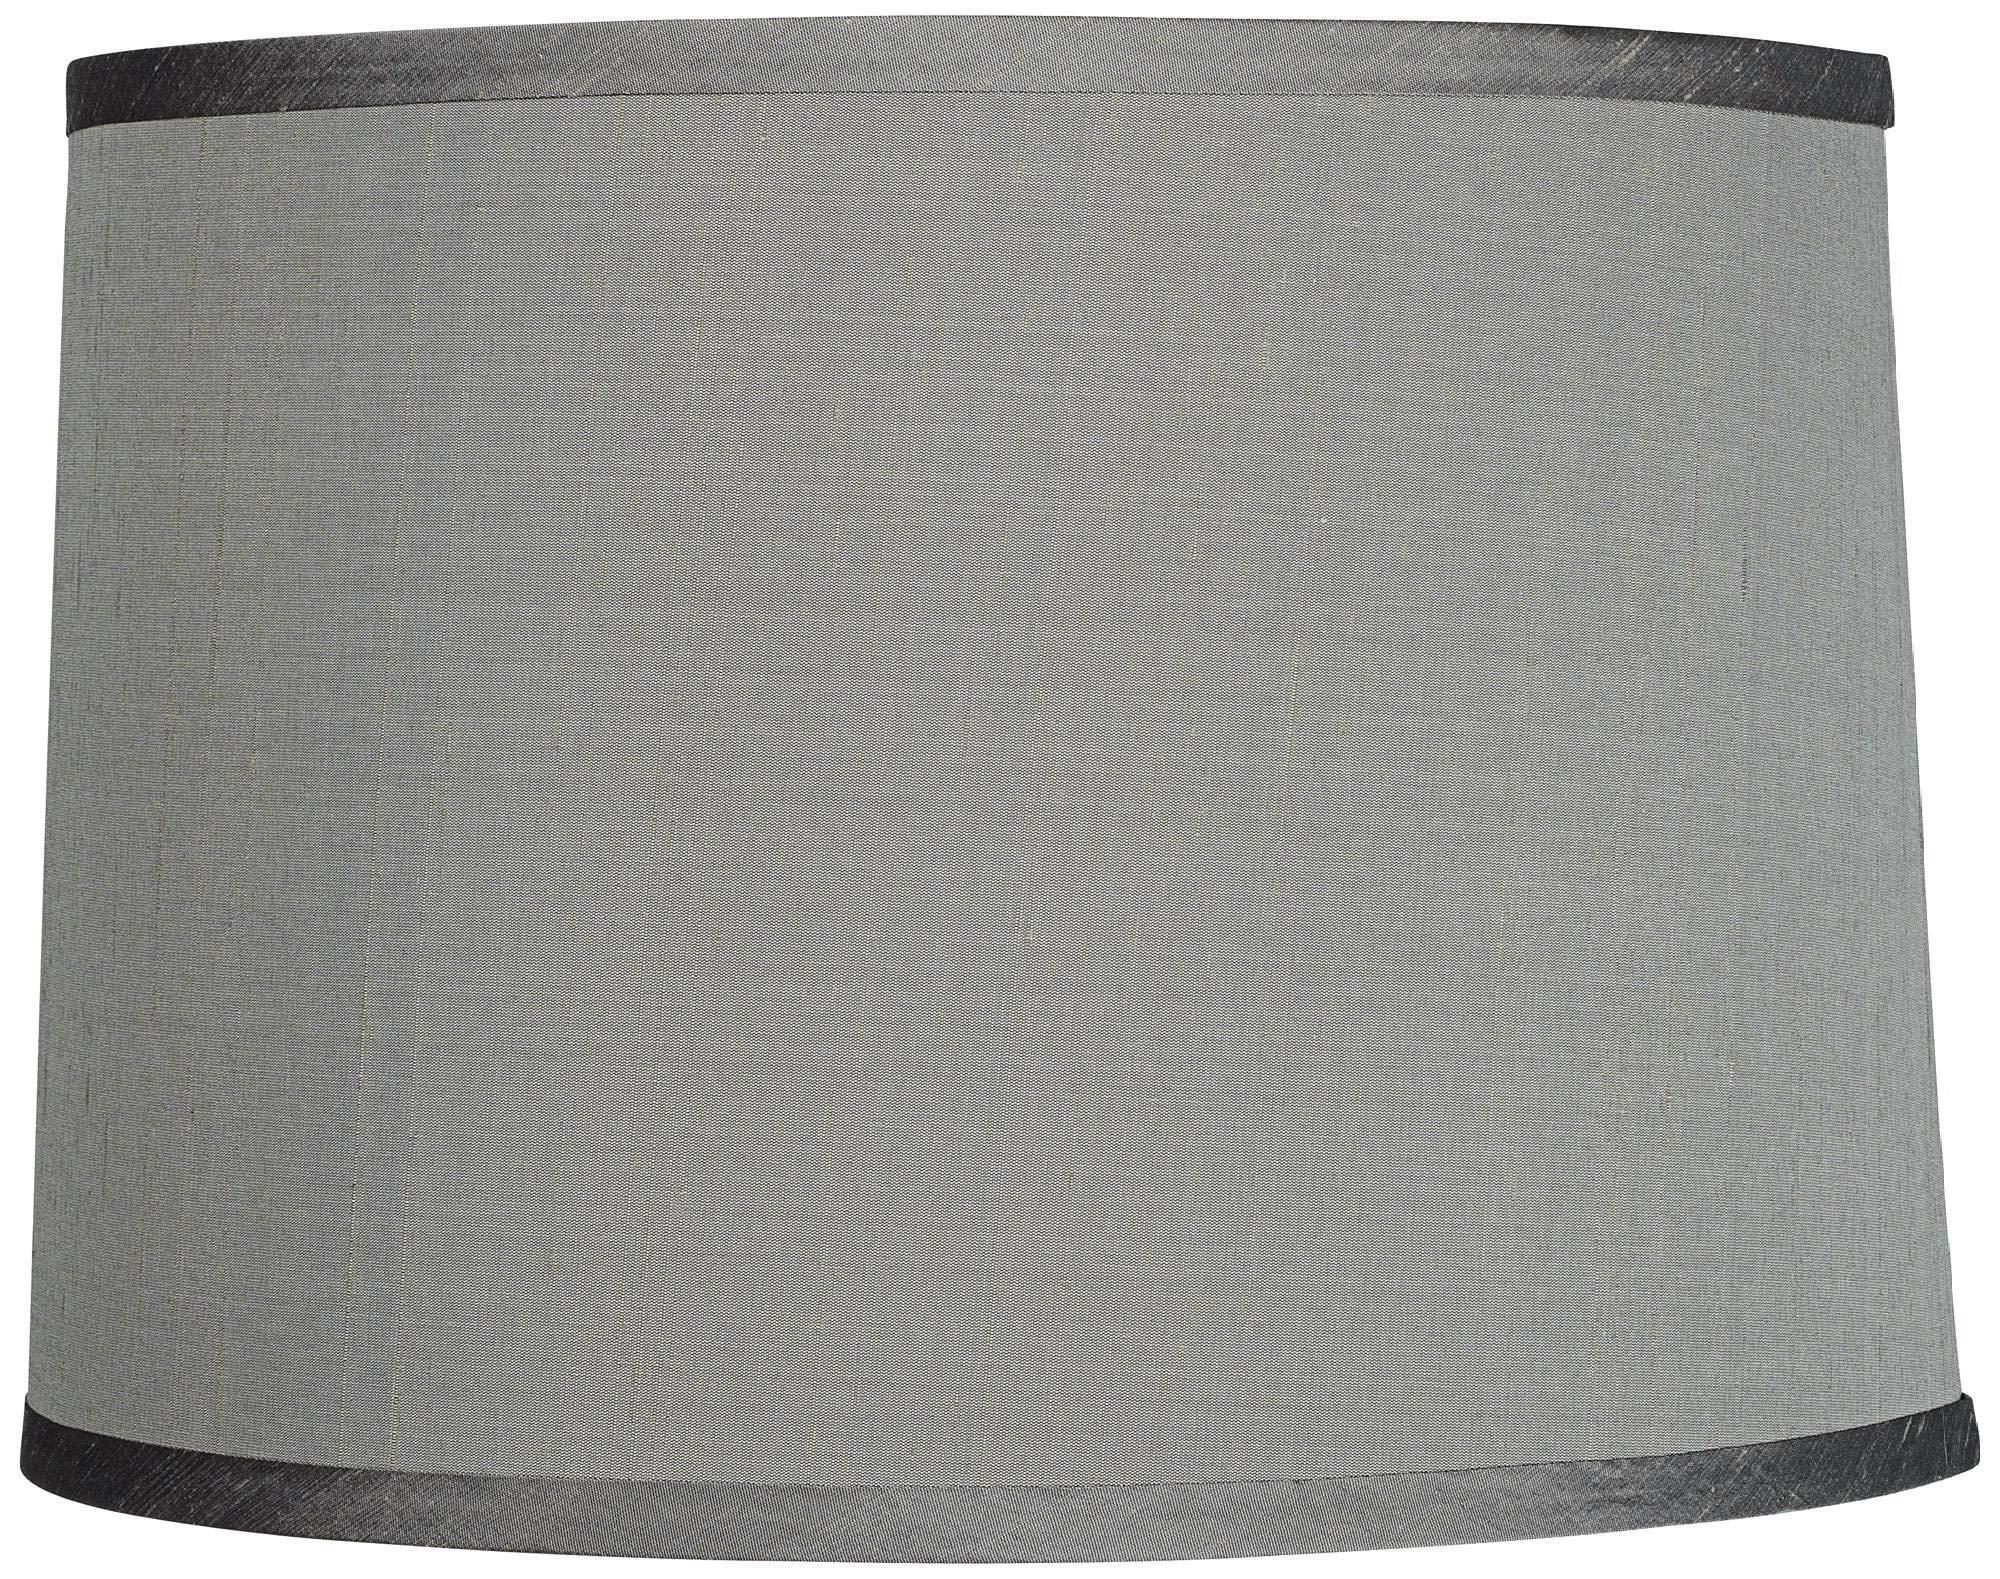 Brentwood Collection platinum gray medium dupioni silk lamp shade 13" top x 14" bottom x 10" slant x 10" high (spider) replacement with harp and f